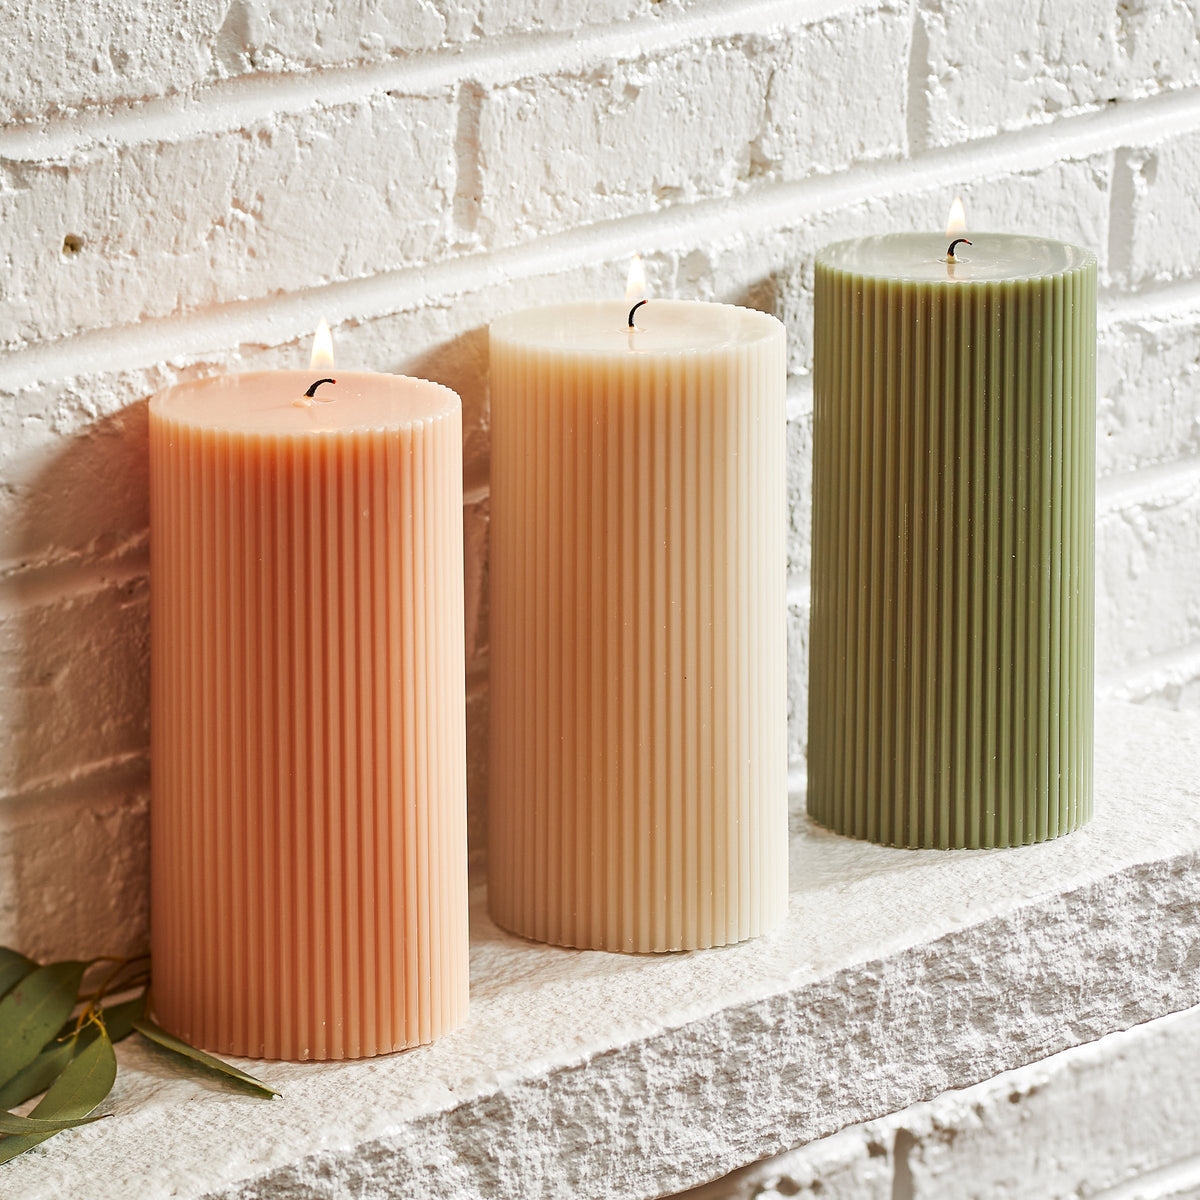 The ribbed Pillar Candle in Petal Pink 6 inch from Caskata is also available in ivory white and moss green. The set of three candles is displayed on a brick mantel.